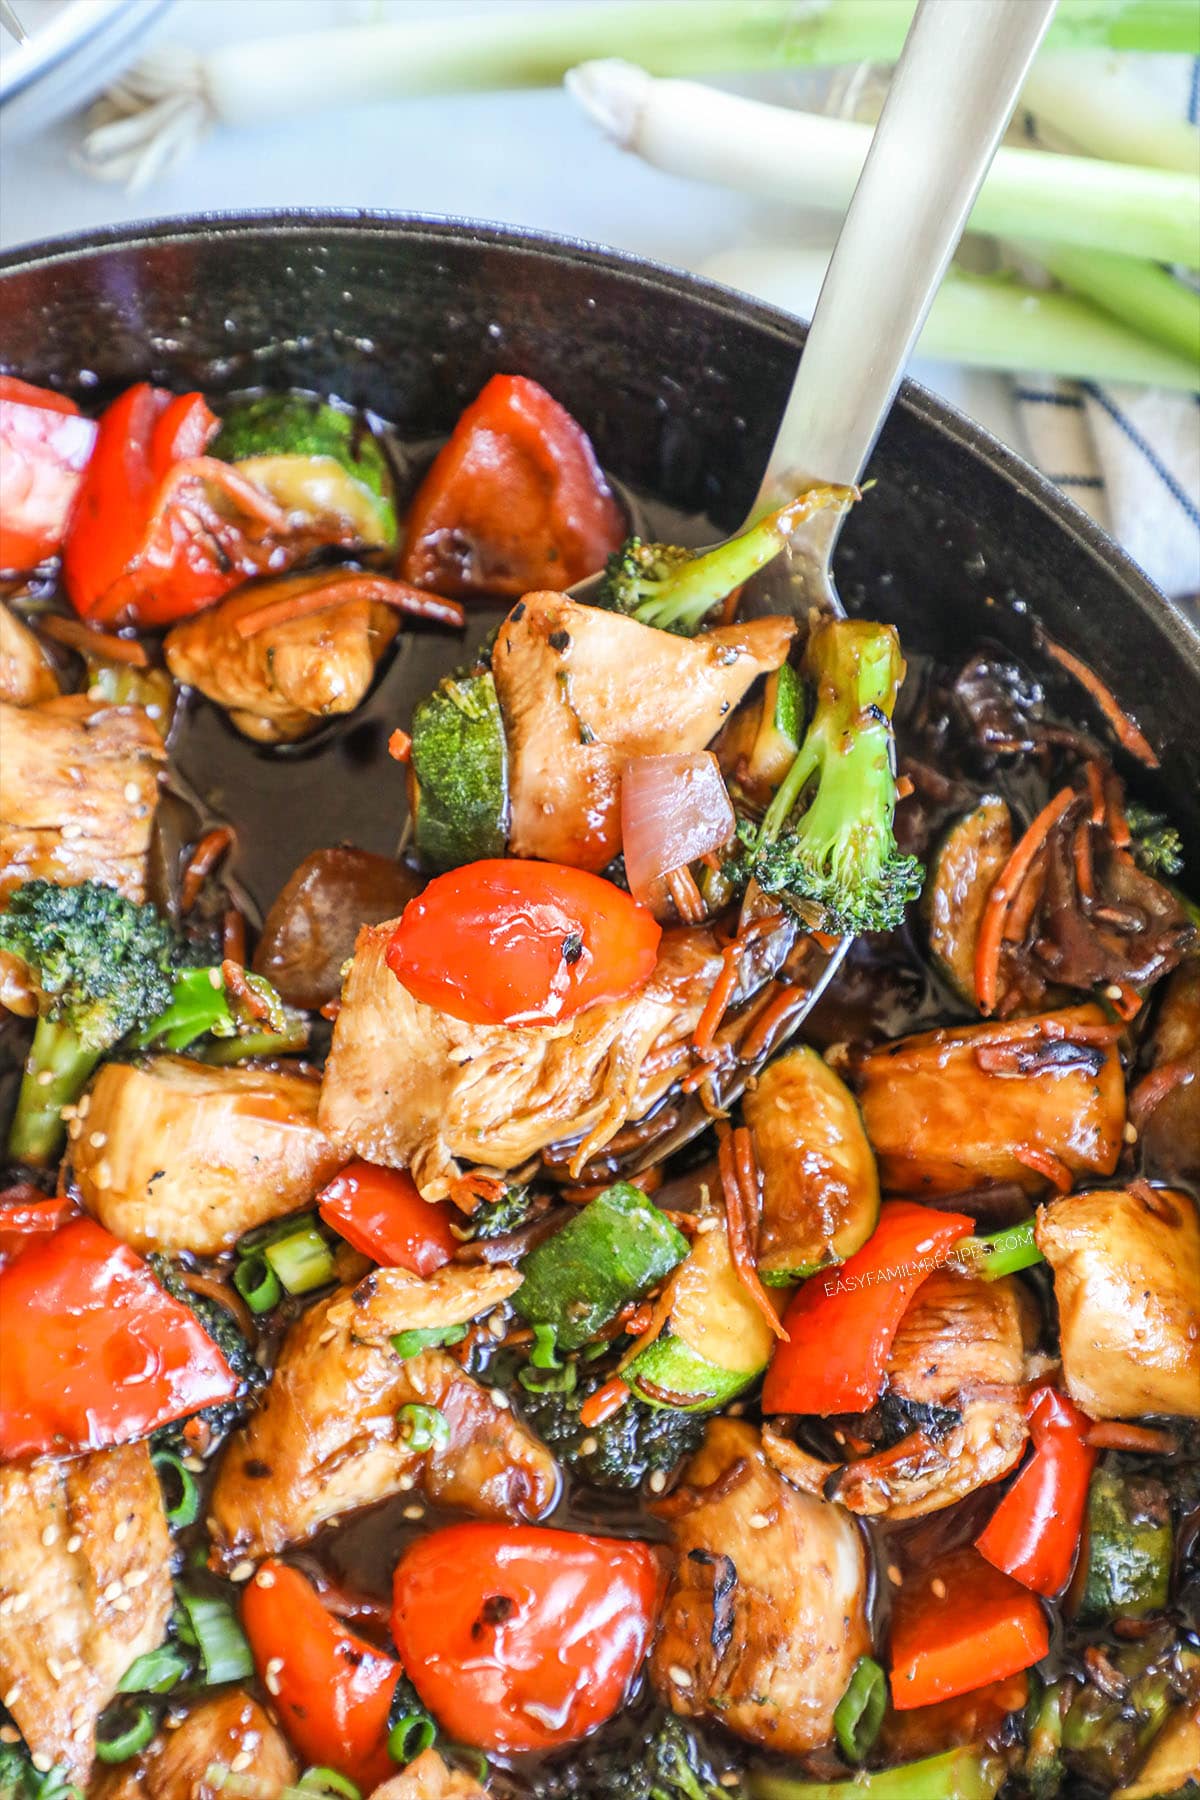 Chicken breast and vegetable stir fry in sweet and sticky stir fry sauce.